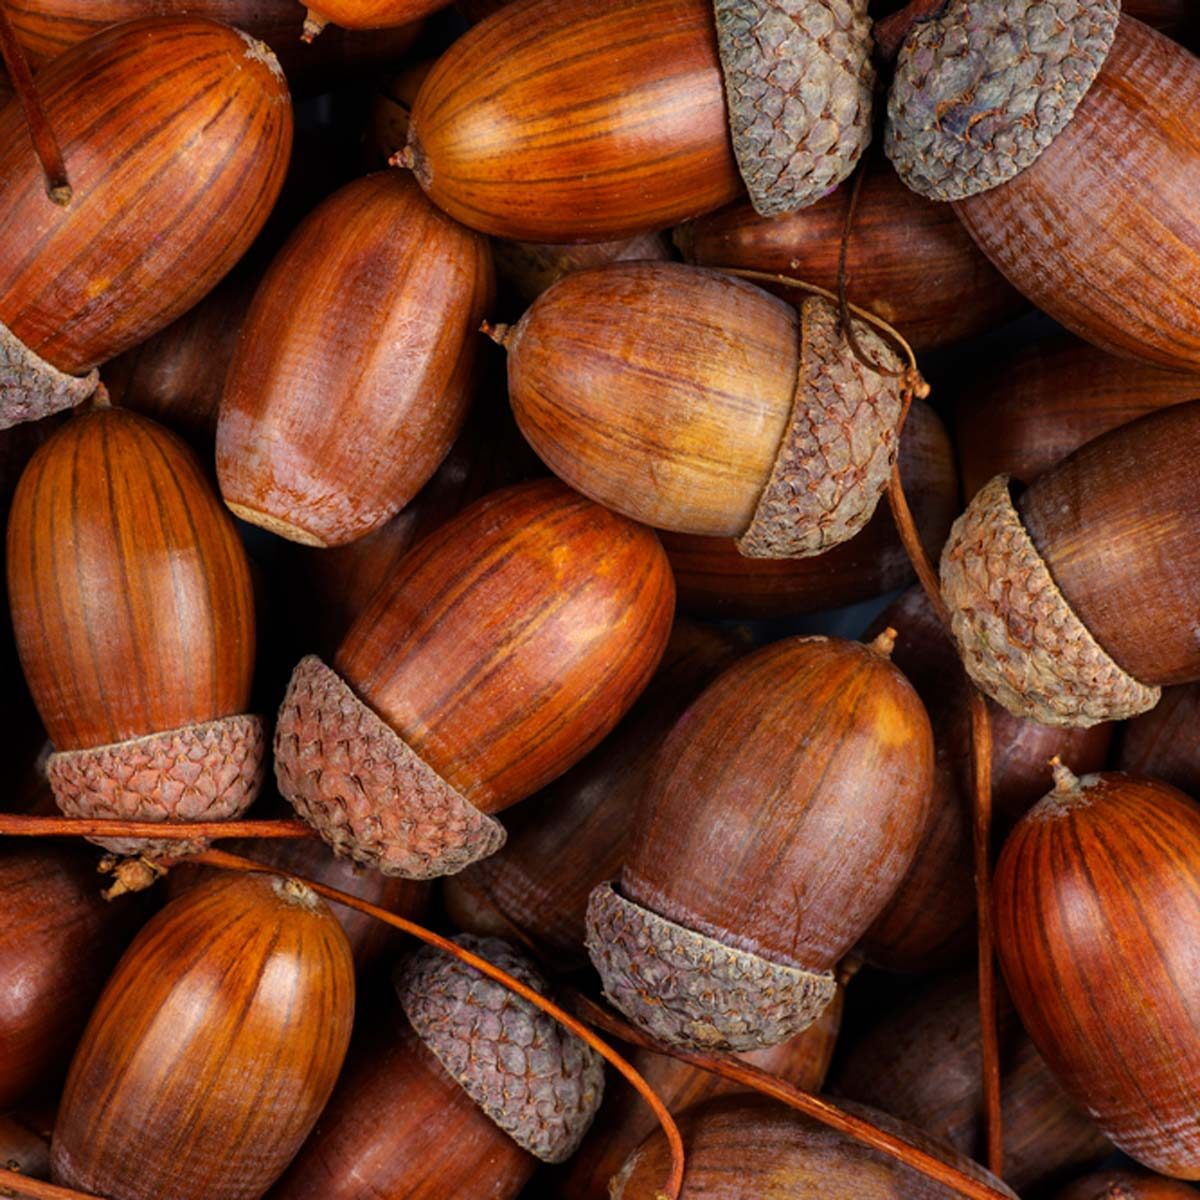 8 Things You Can Make With All of Those Acorns